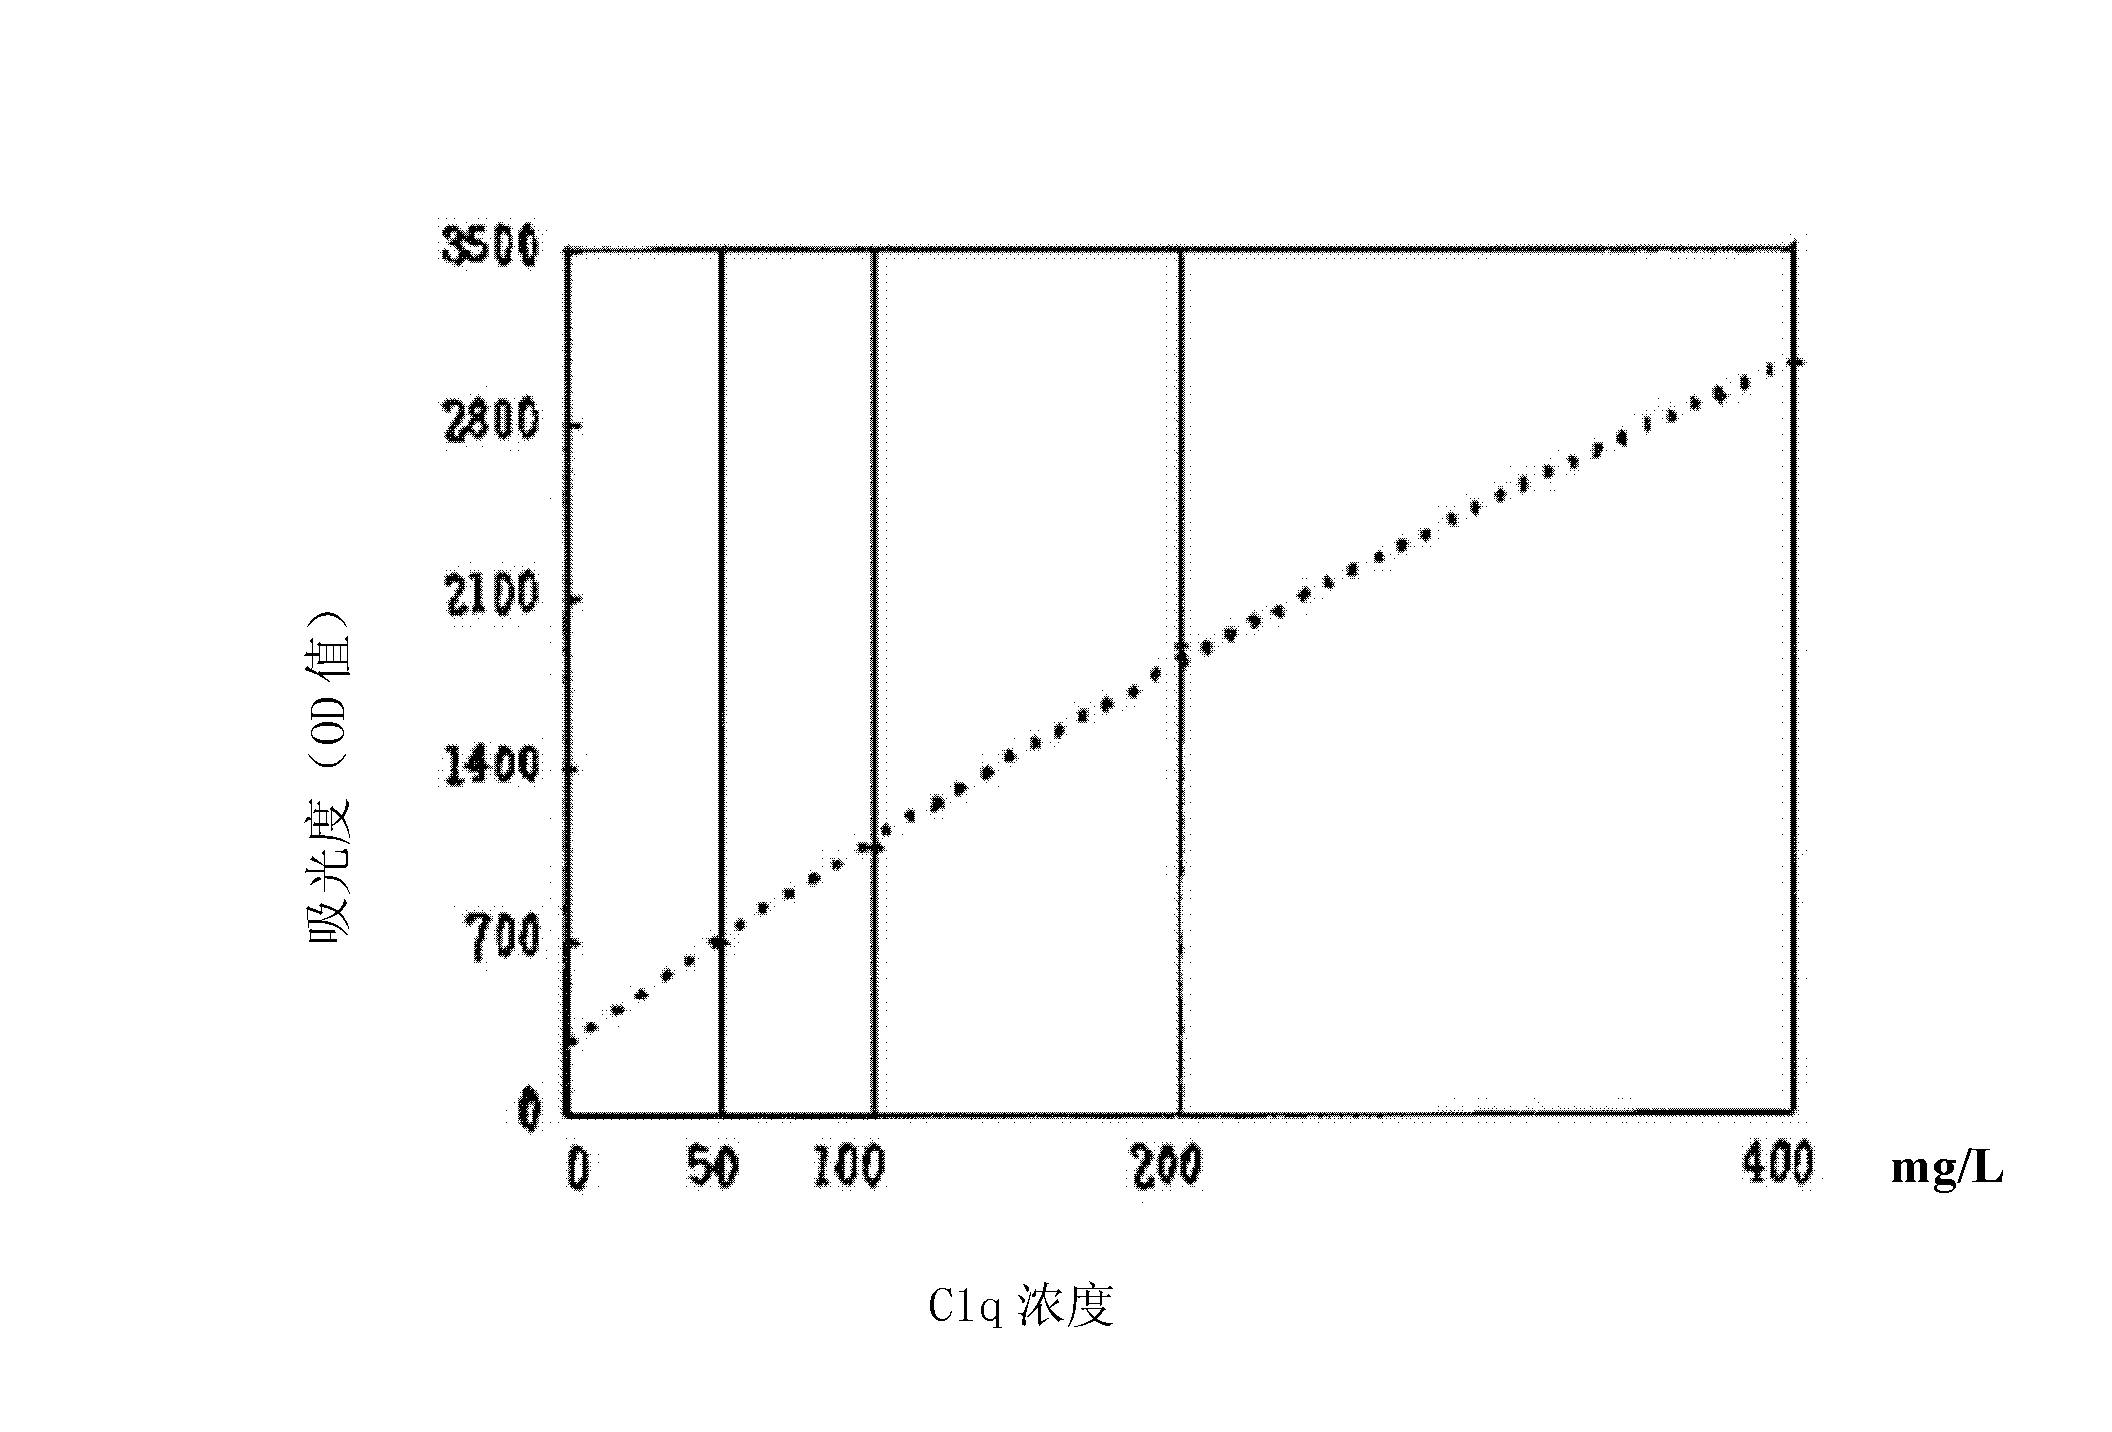 Kit and method for detecting concentration of complement Clq in human serum